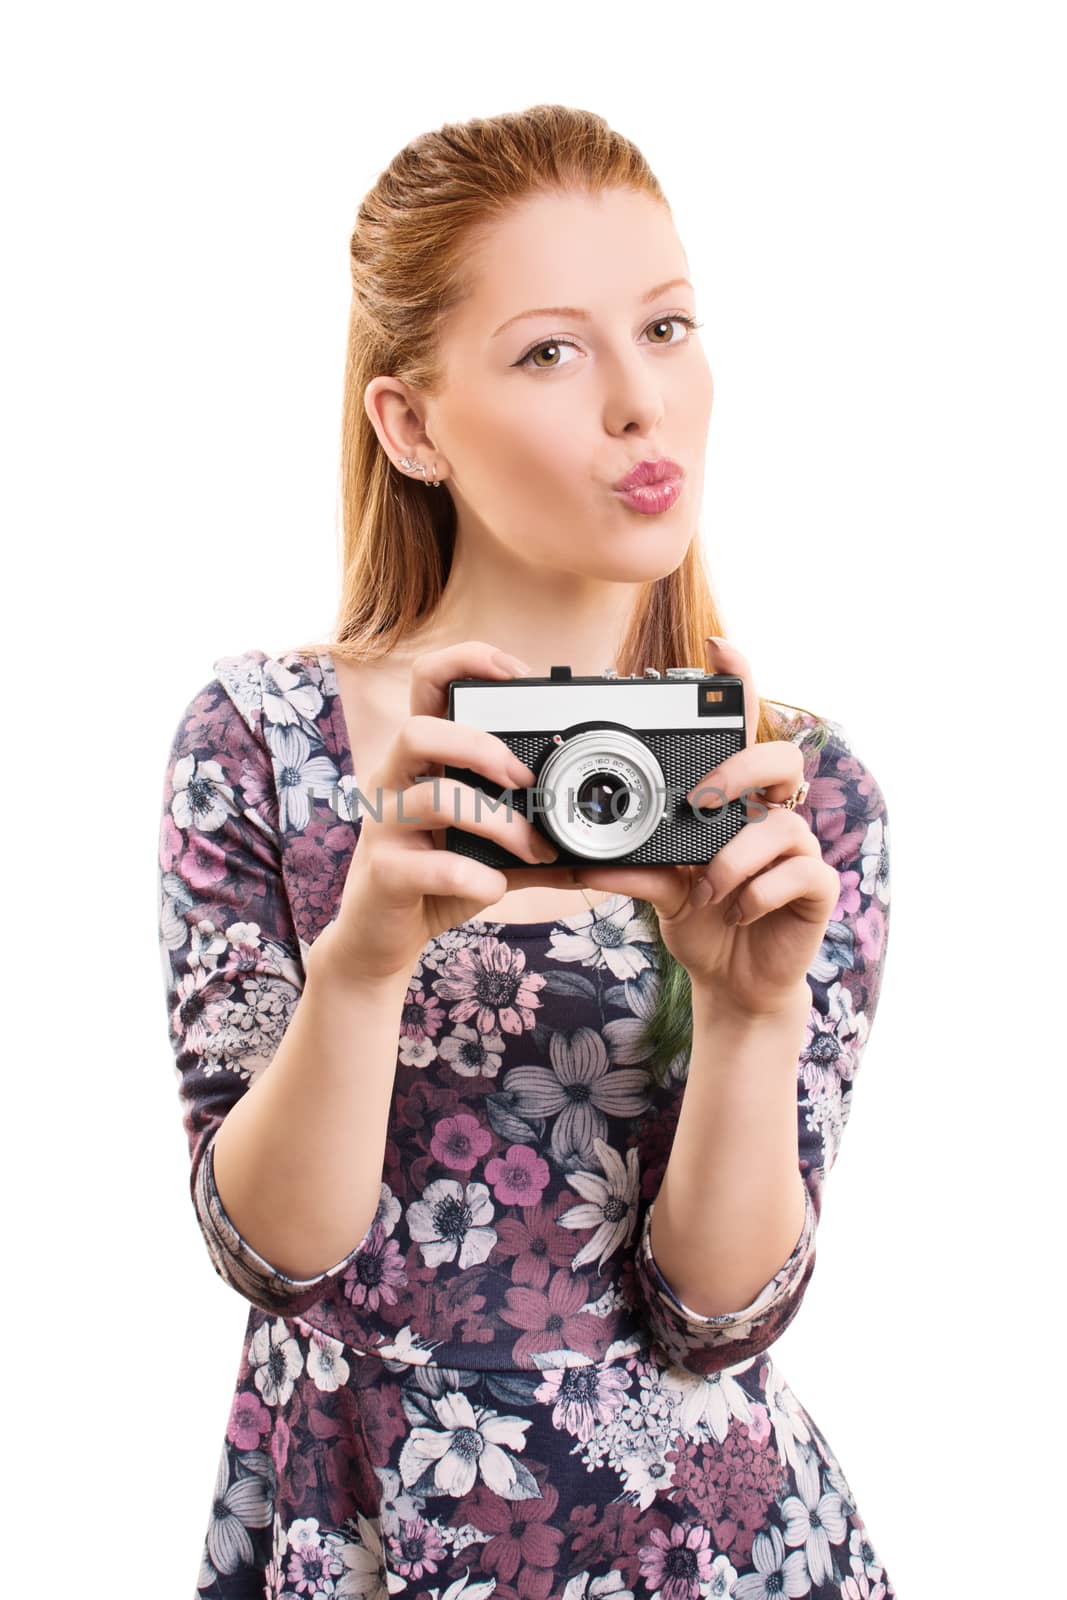 A portrait of a beautiful young girl taking a picture with a vintage camera, isolated on white background.